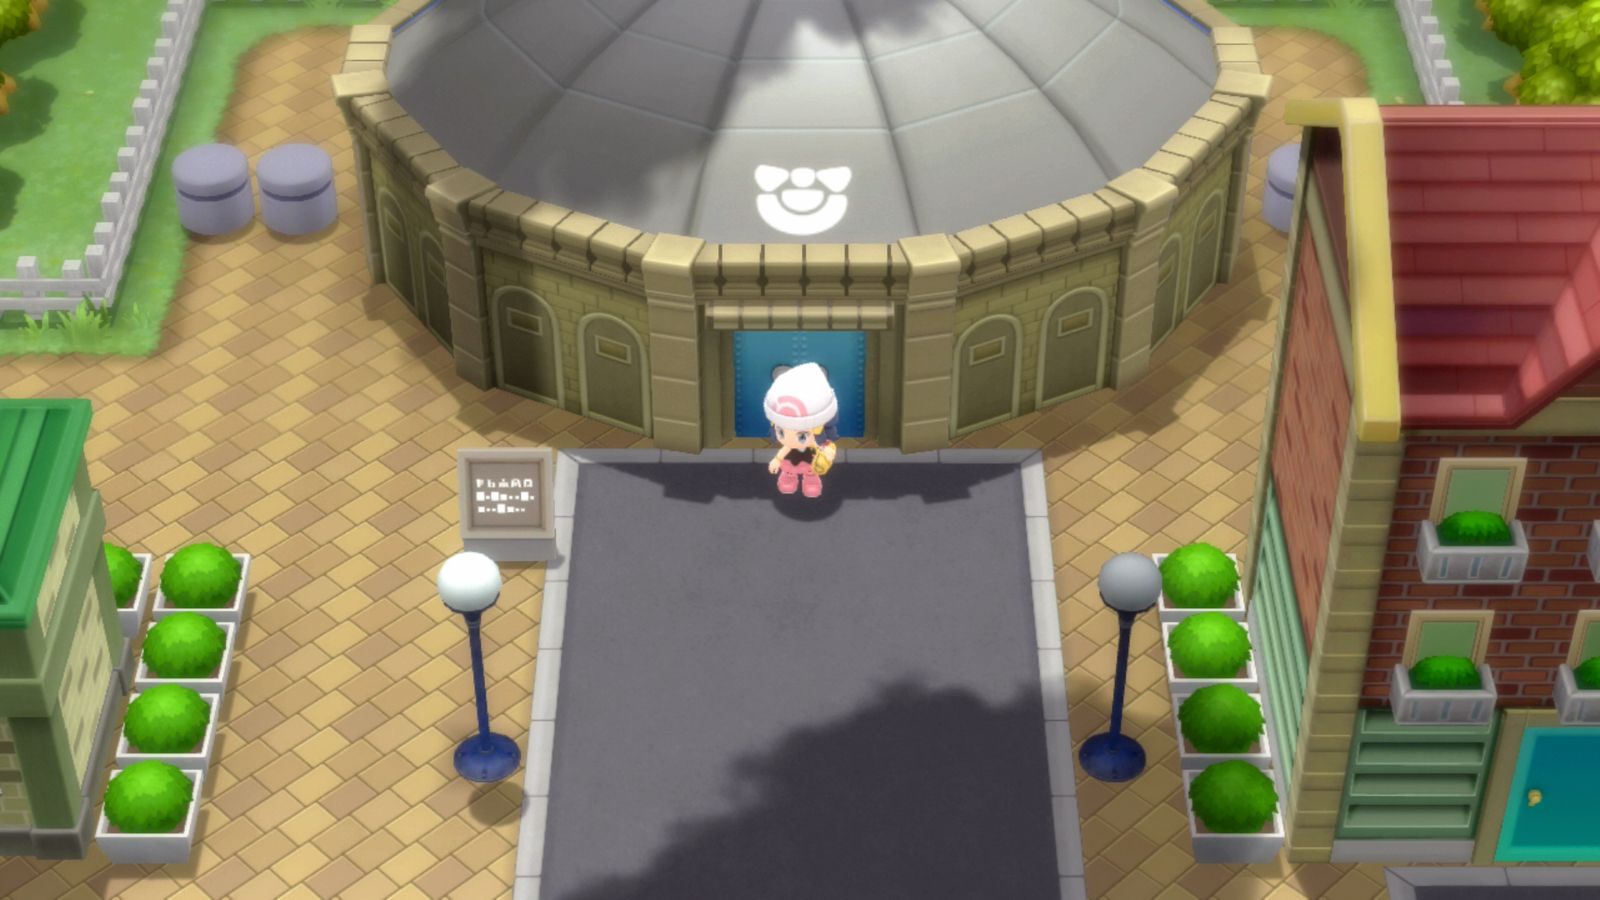 5 important things we now know about Pokemon Brilliant Diamond